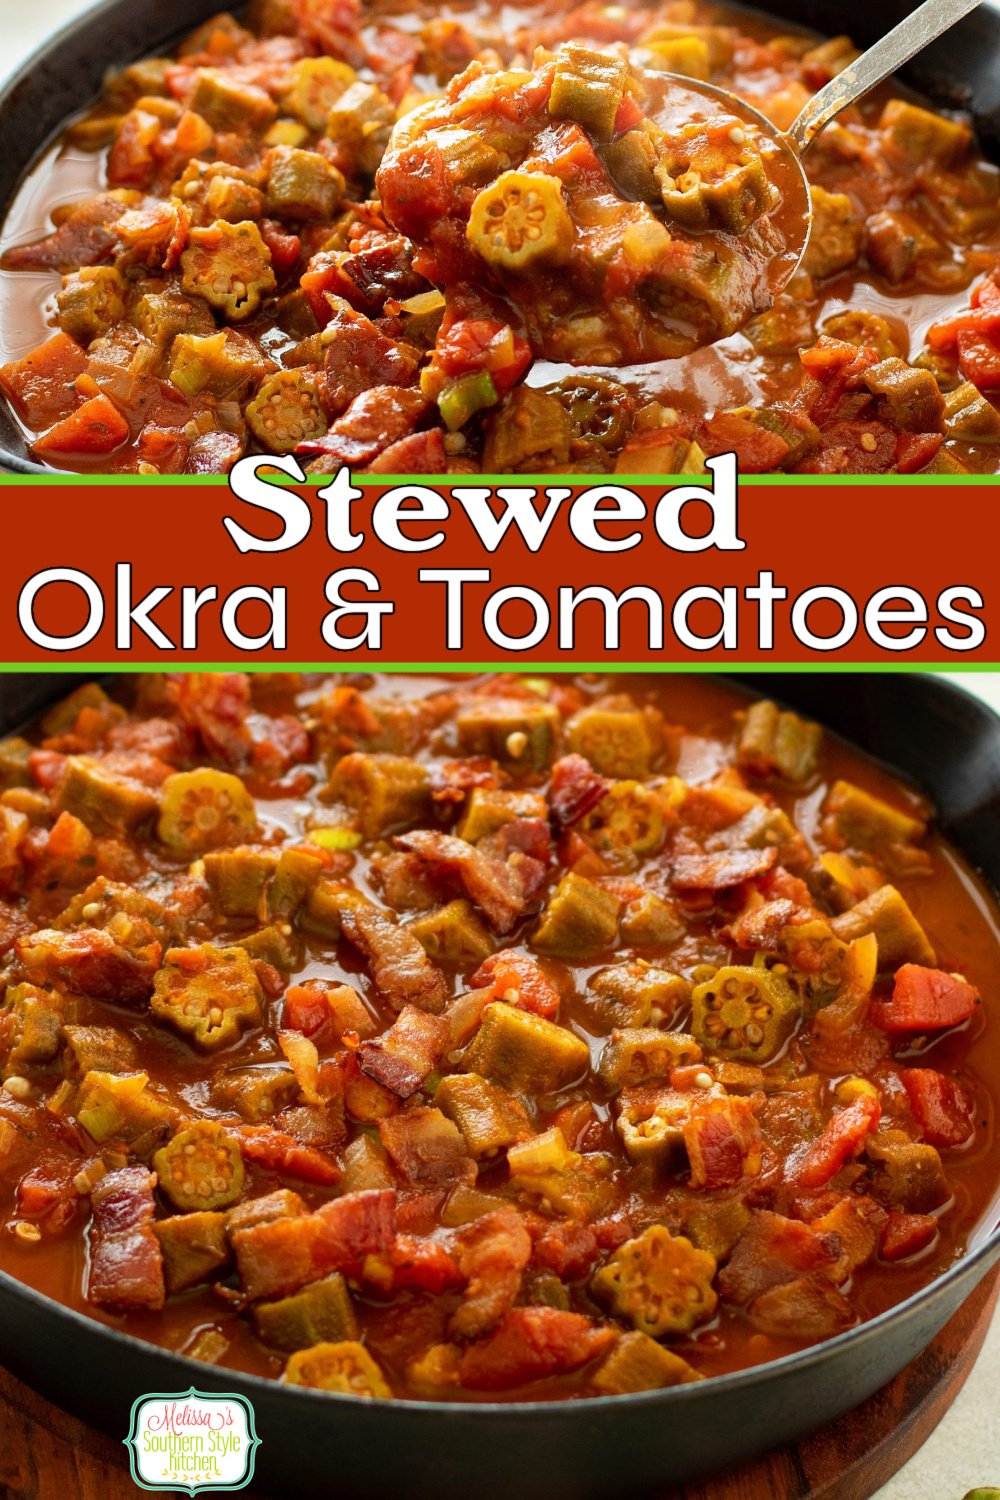 This Southern Stewed Okra with Tomatoes recipe is a classic summertime side dish to make. It works well using frozen okra, too! #stewedokra #bestokrarecipes #okra #Southernstewedokra #okrawithtomatoes #strewedokrawithtomatoes #easyokrarecipe via @melissasssk